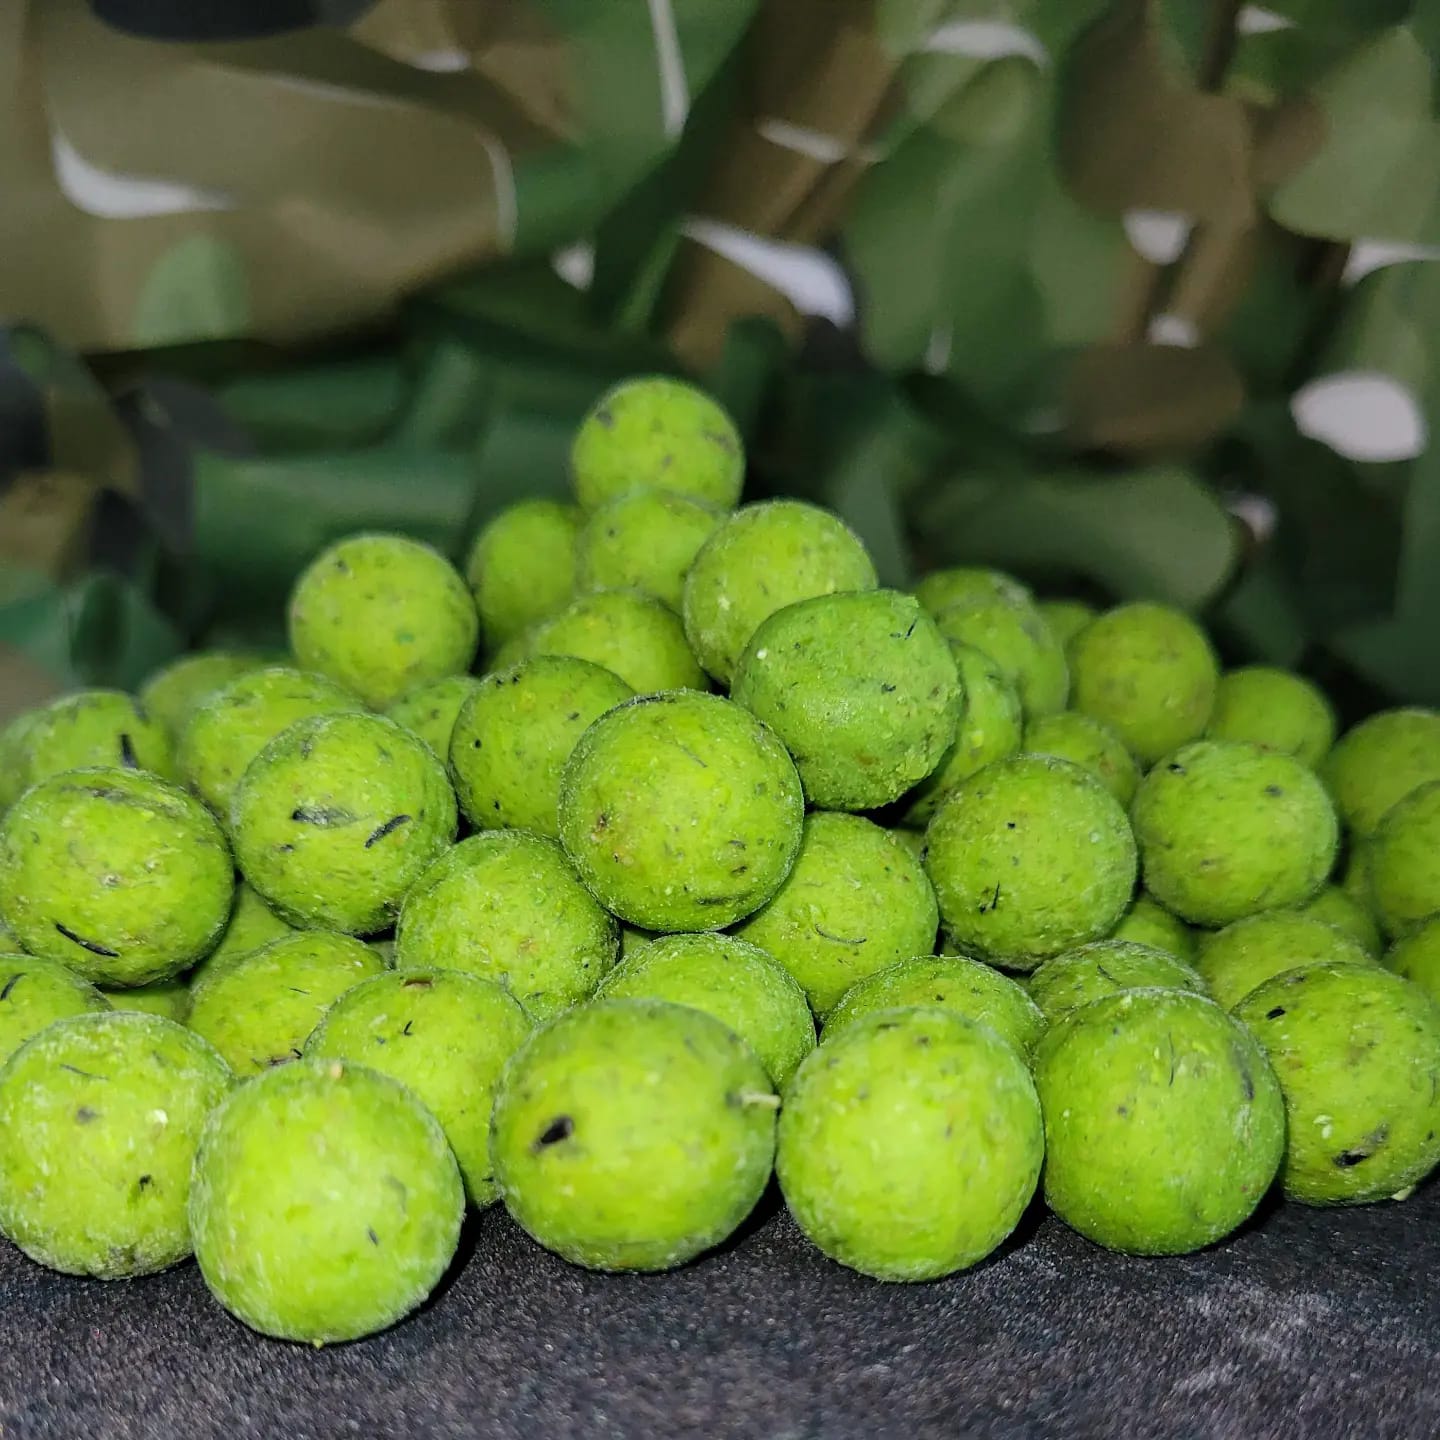 Premium Boilies: GLM (Green Lipped Mussel)